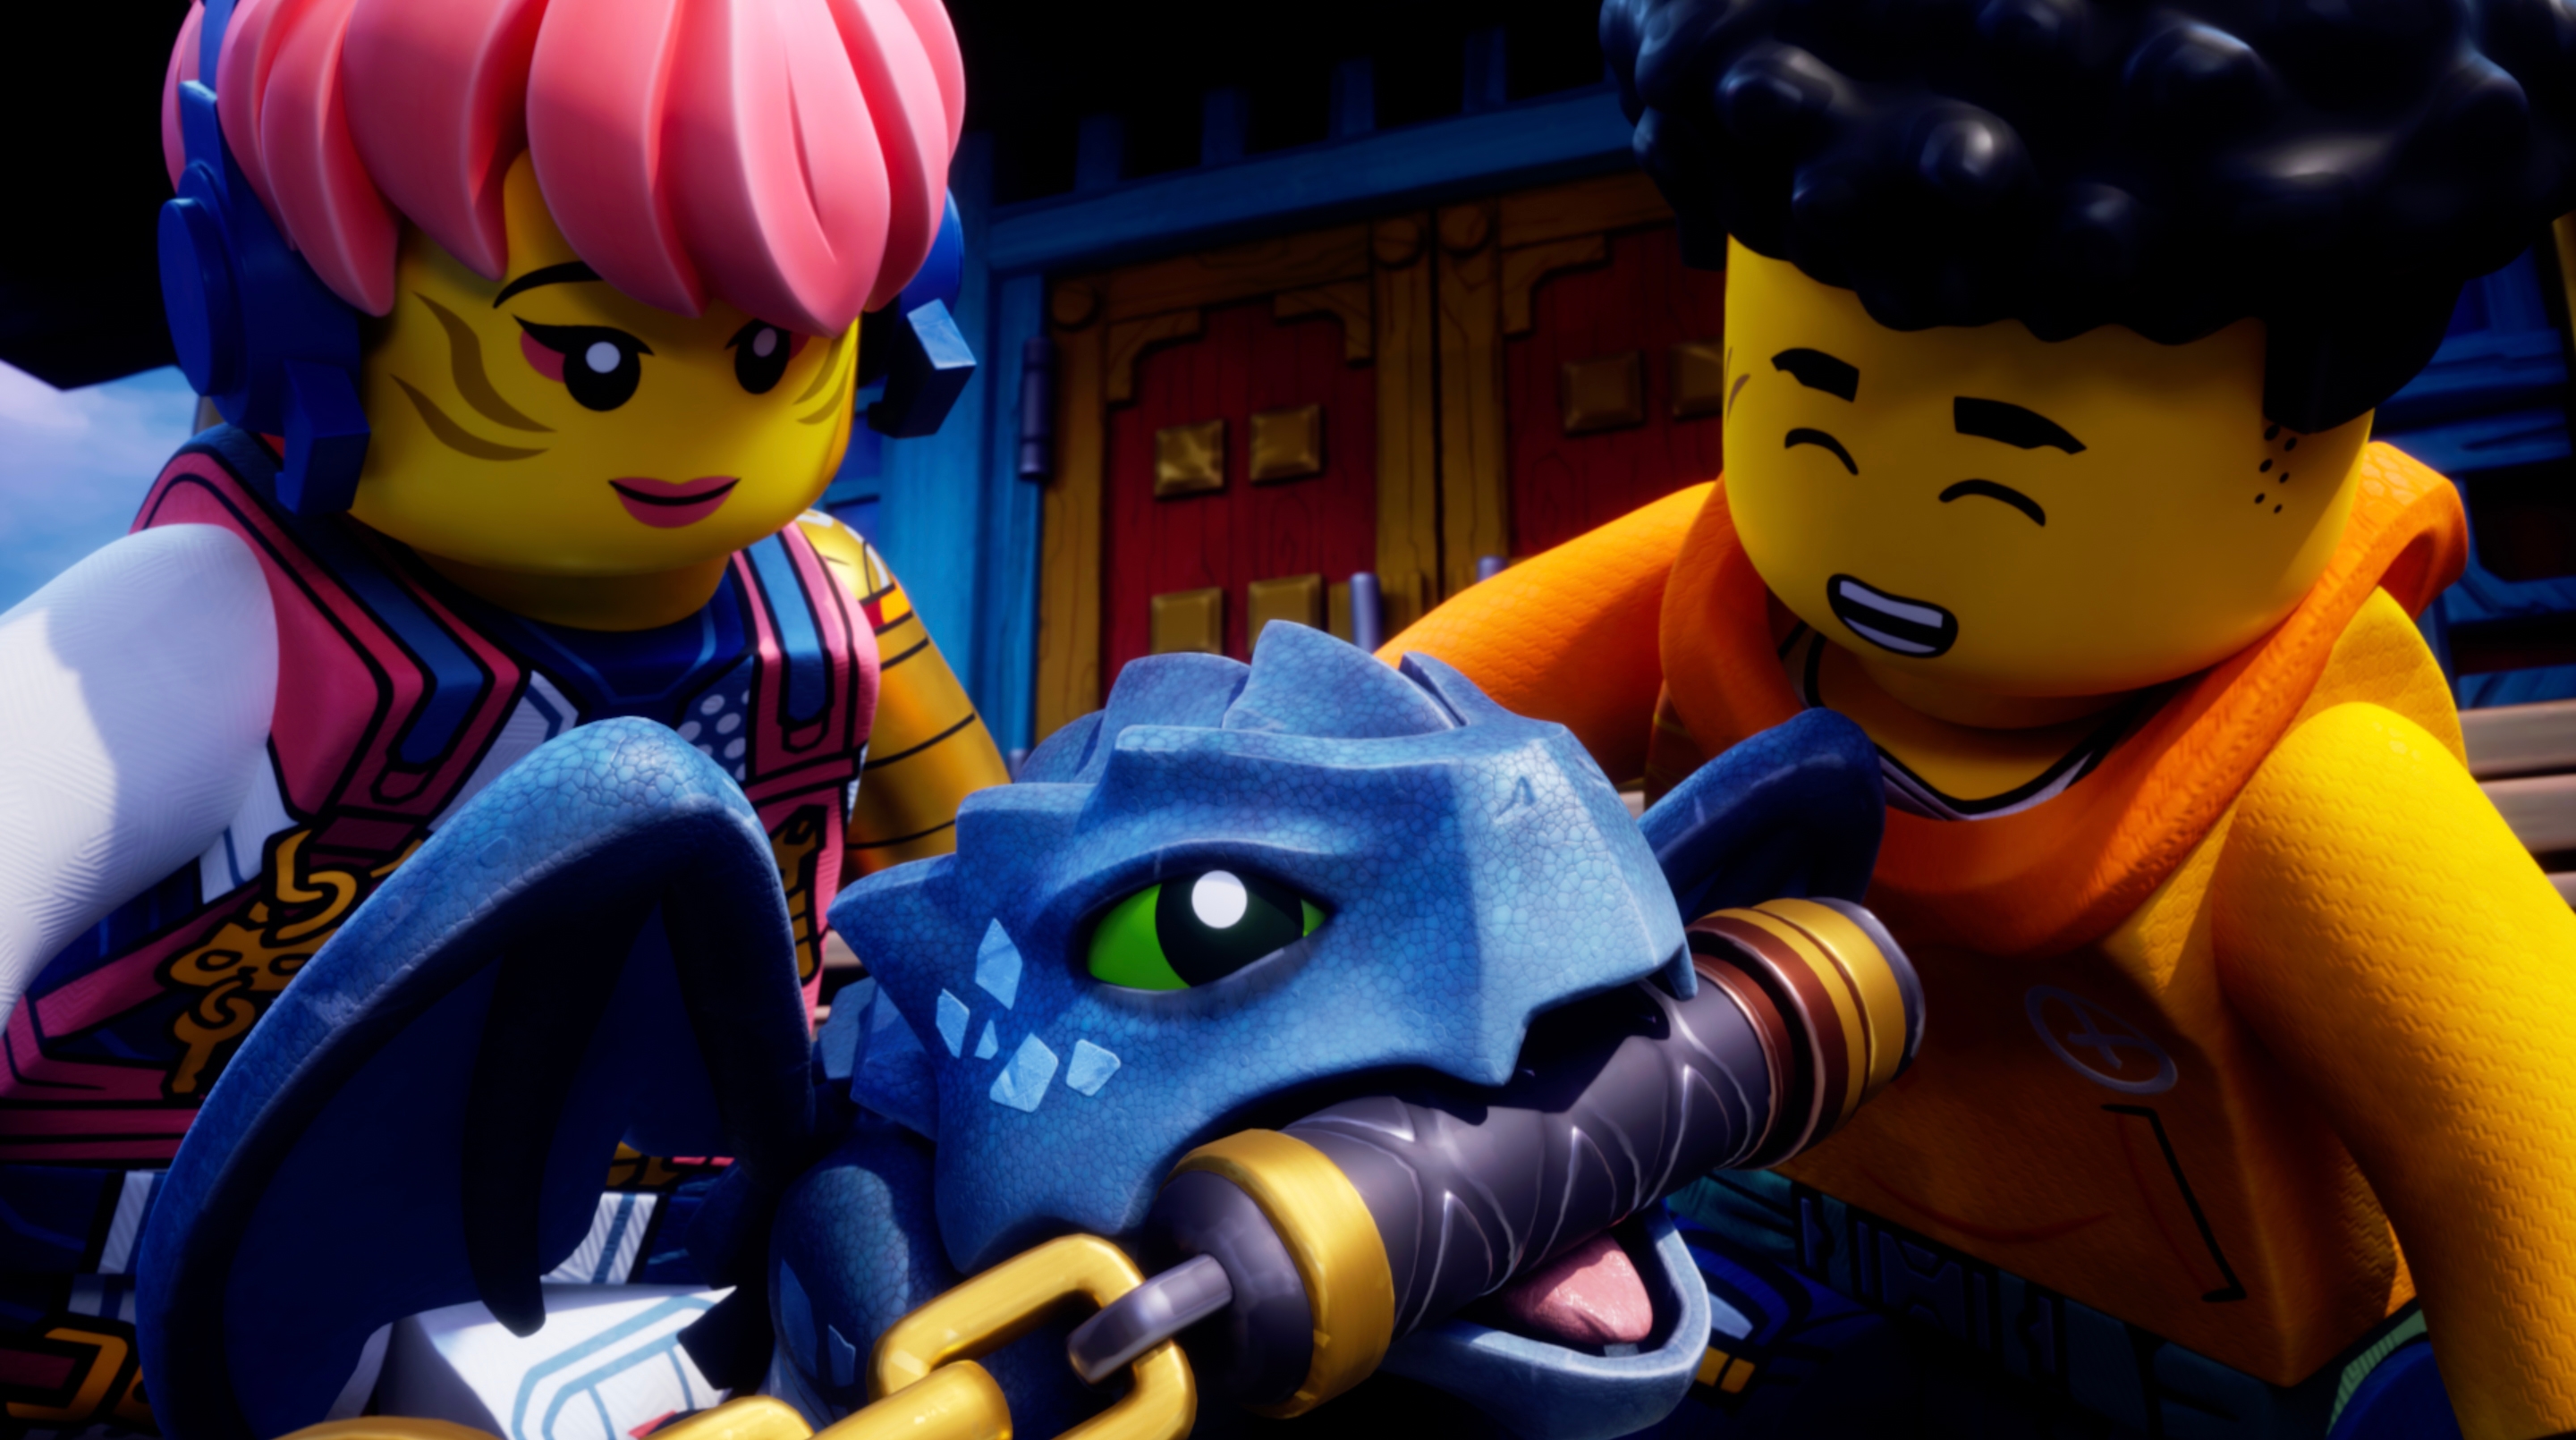 LEGO Fortnite: How to play the new era in gaming and what it costs